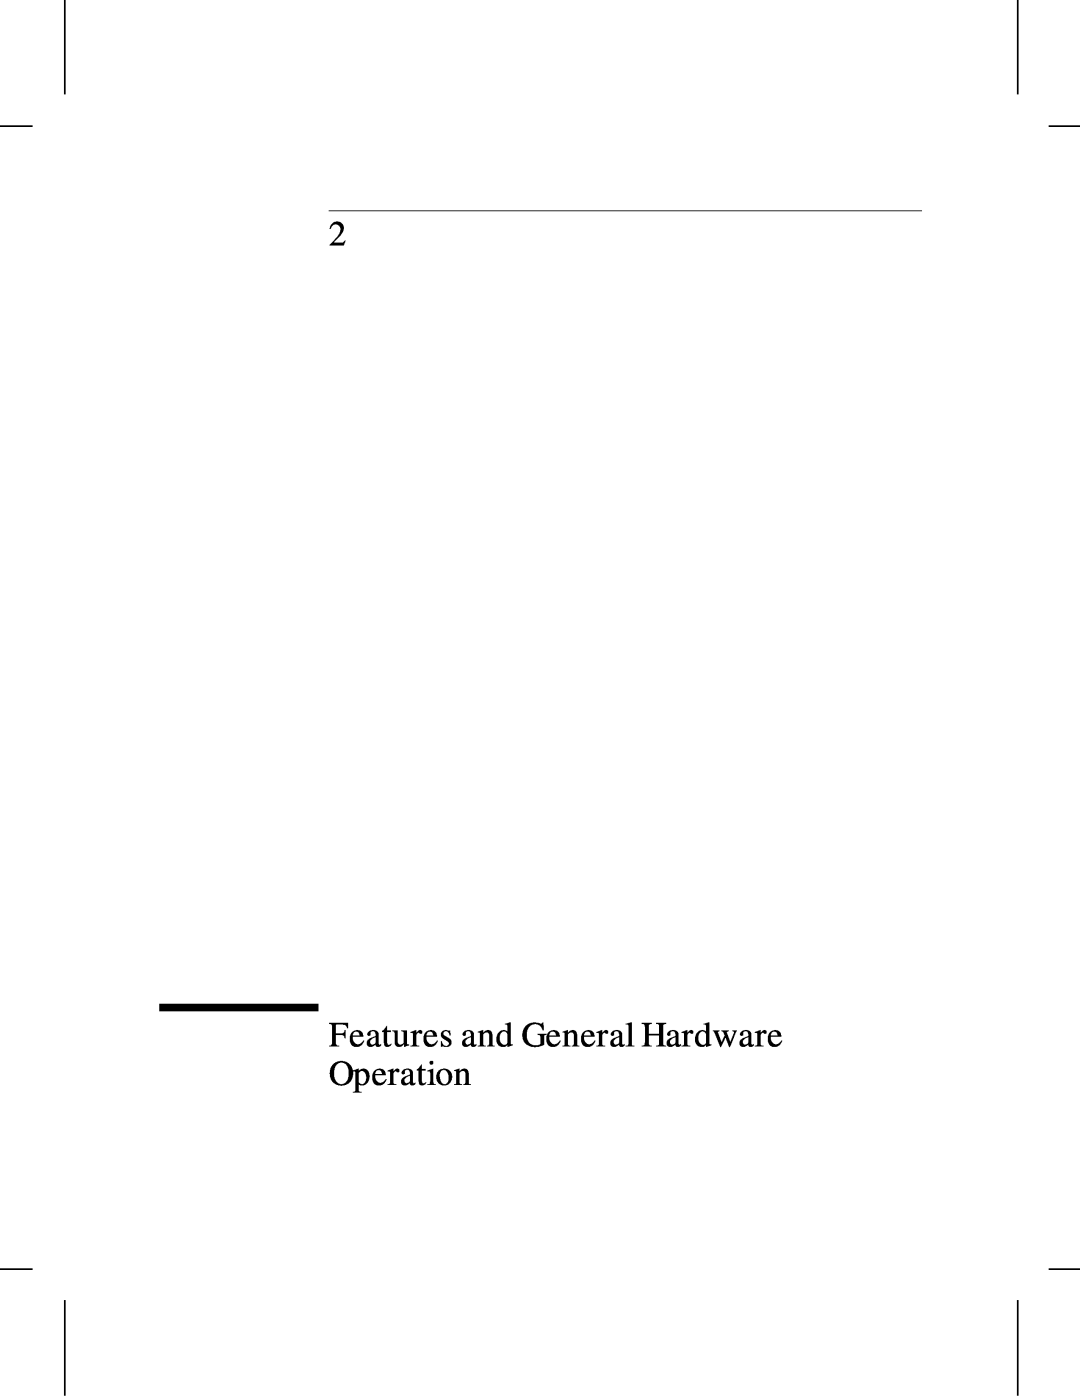 HP 480 manual Features and General Hardware Operation 